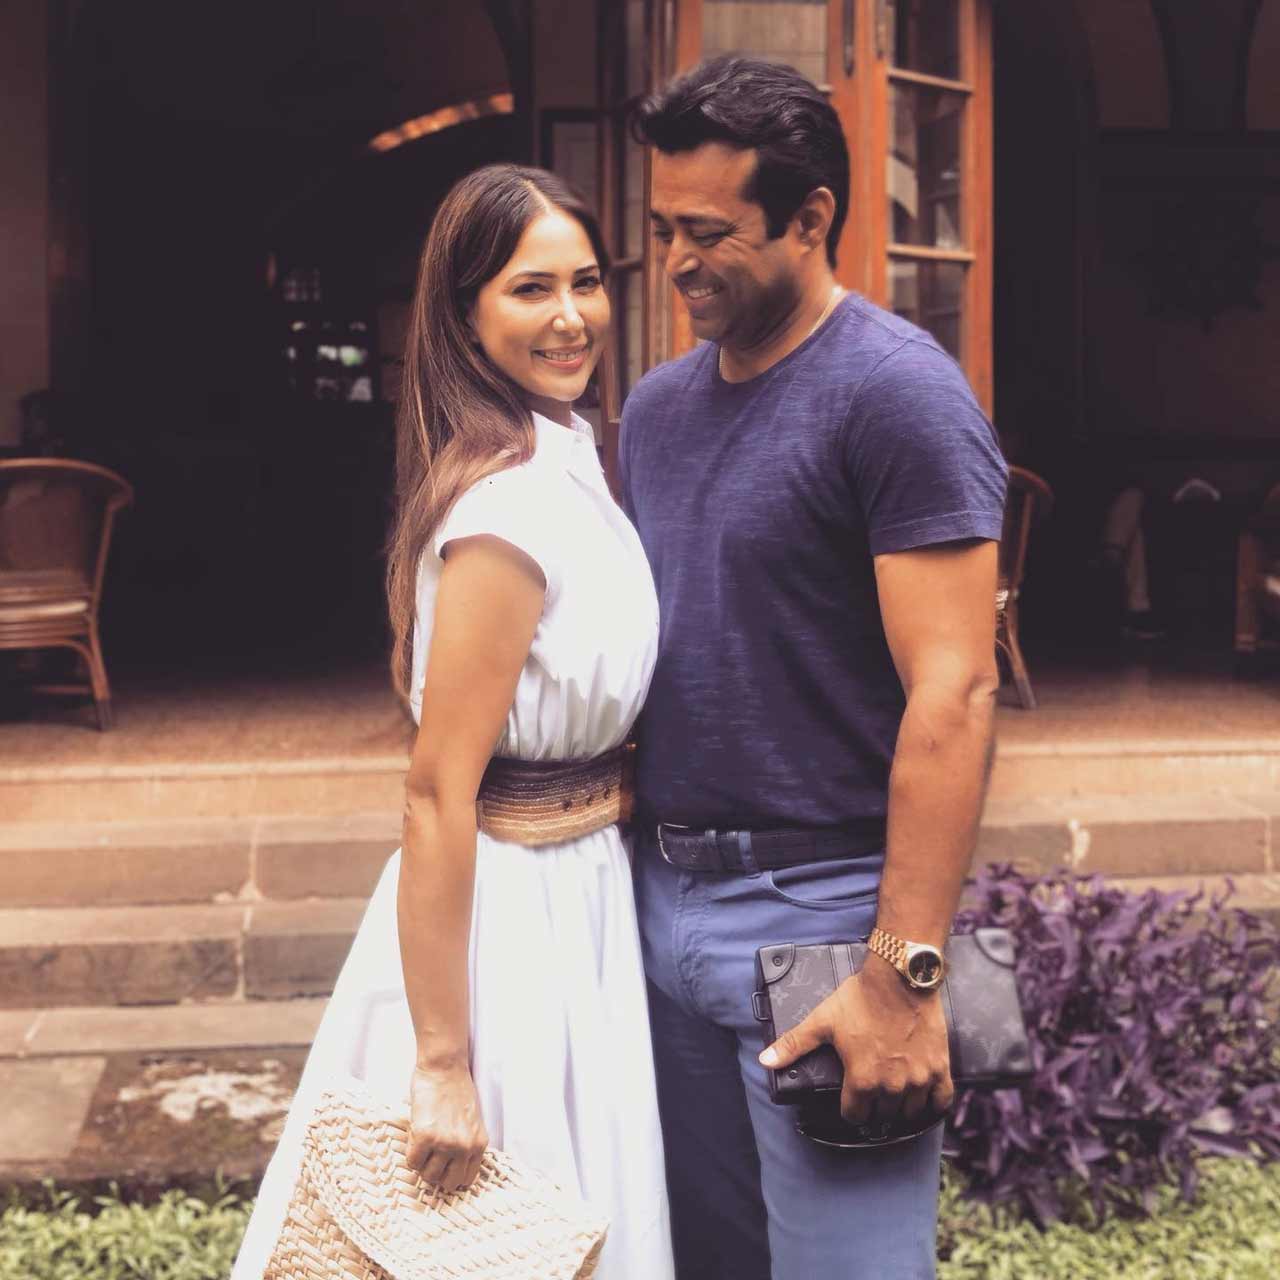 The rumours about Kim and Paes' relationship have been doing the rounds for a long time and the actress put an end to the speculations by confirming her relationship status with a picture she shared on Instagram.